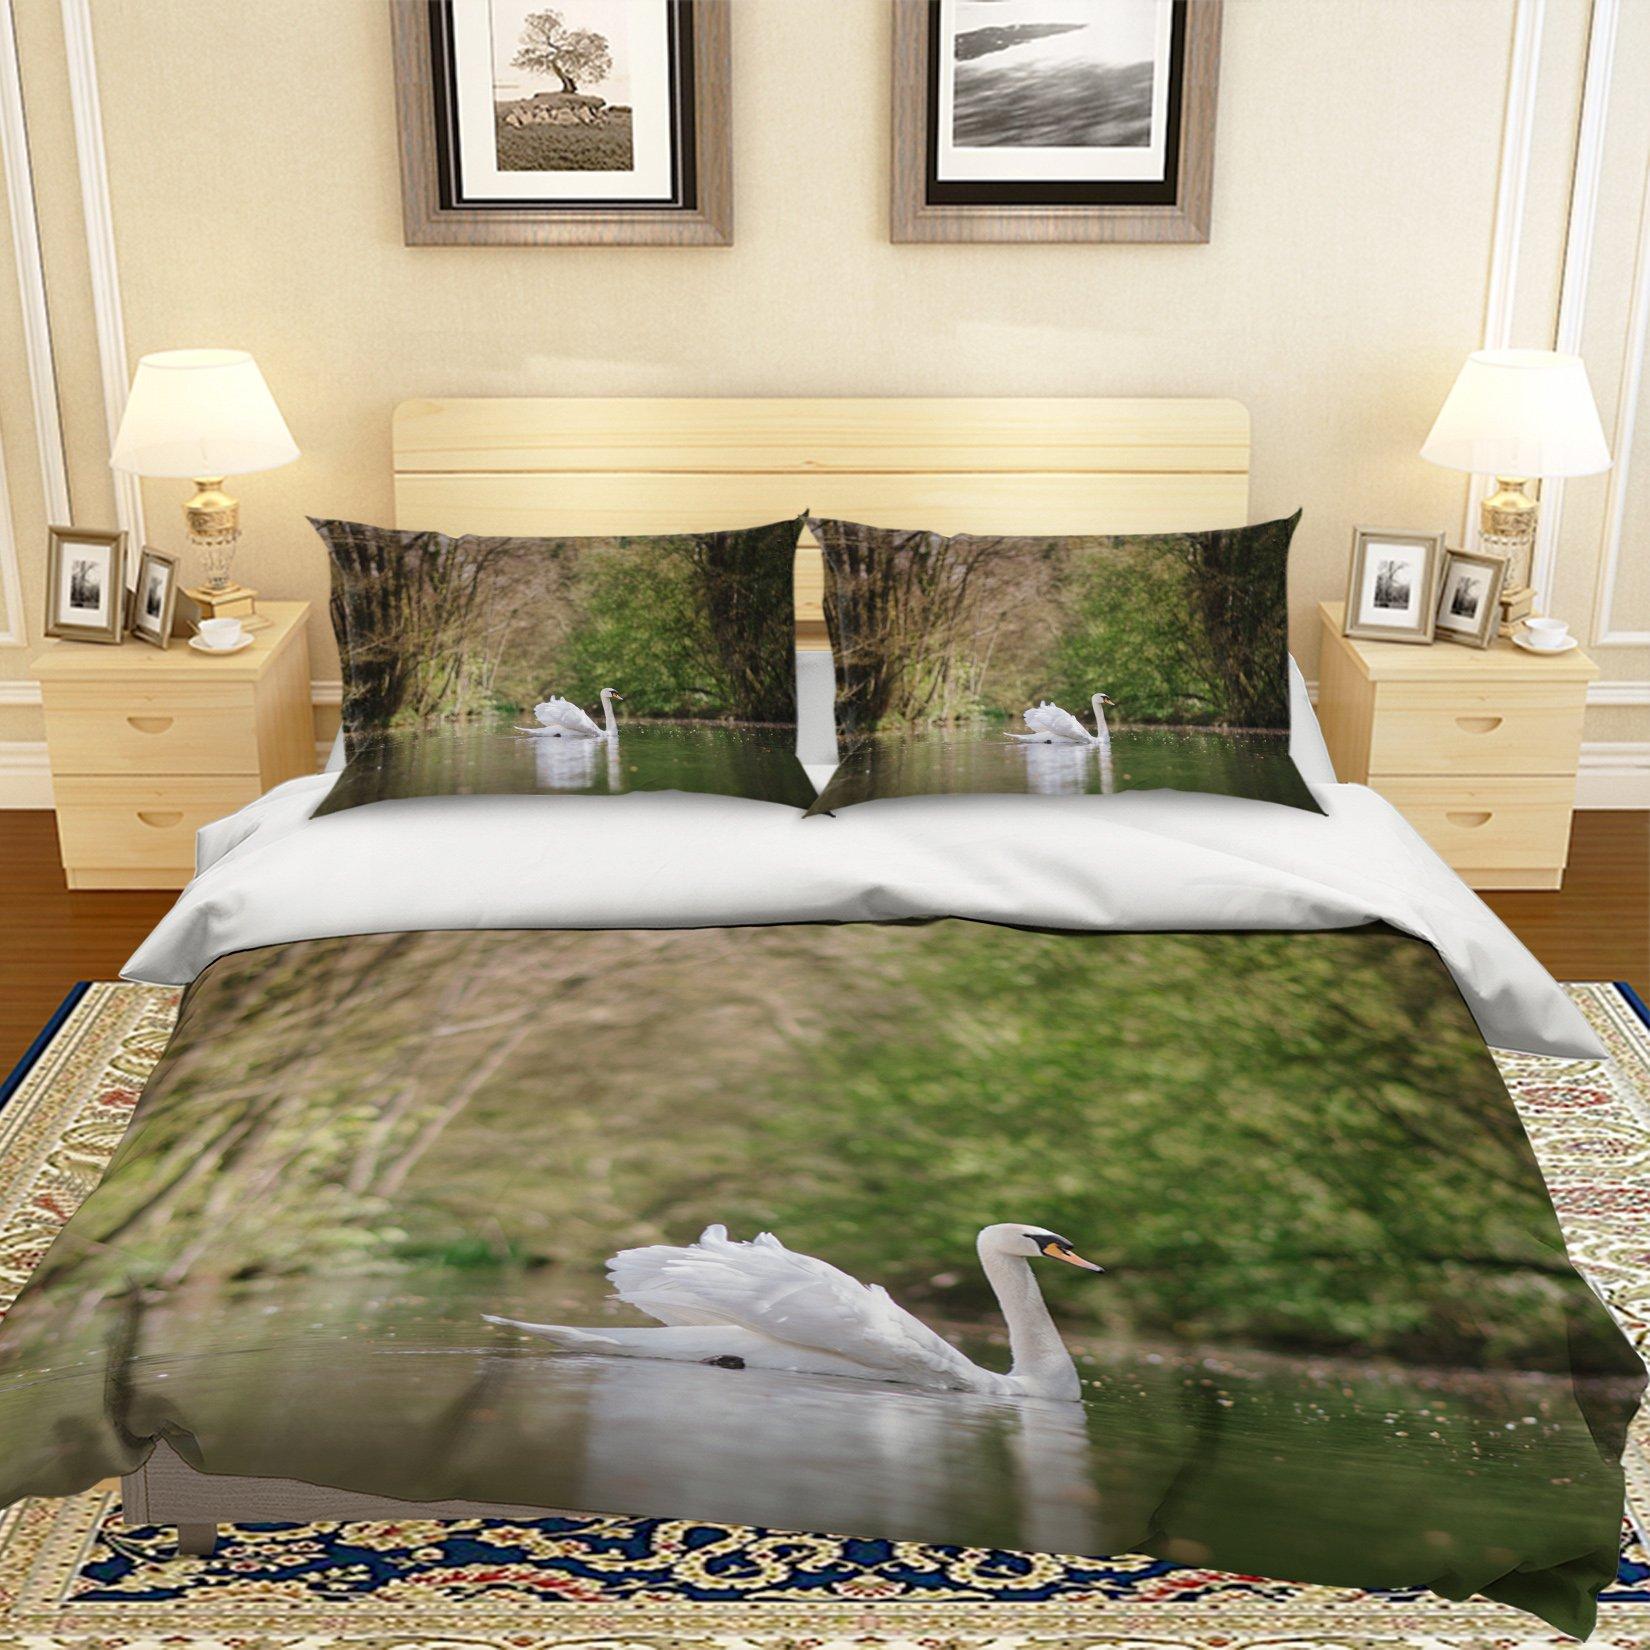 3D White Swan 2009 Bed Pillowcases Quilt Quiet Covers AJ Creativity Home 